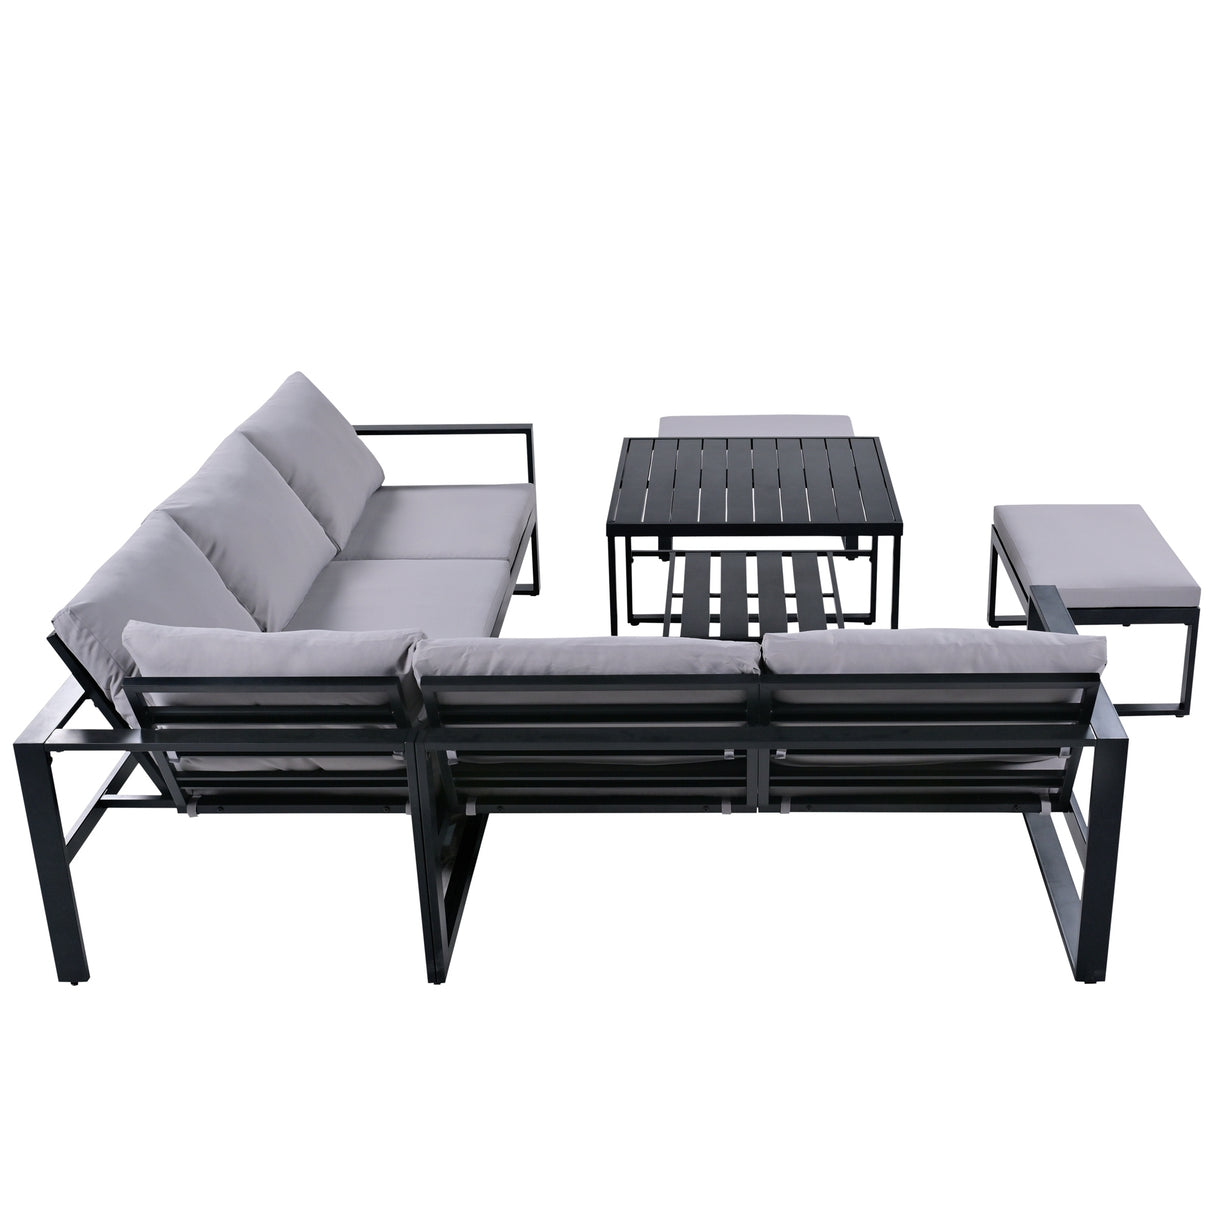 【Not allowed to sell to Wayfair】U_Style Industrial Style Outdoor Sofa Combination Set With 2 Love Sofa,1 Single Sofa,1 Table,2 Bench